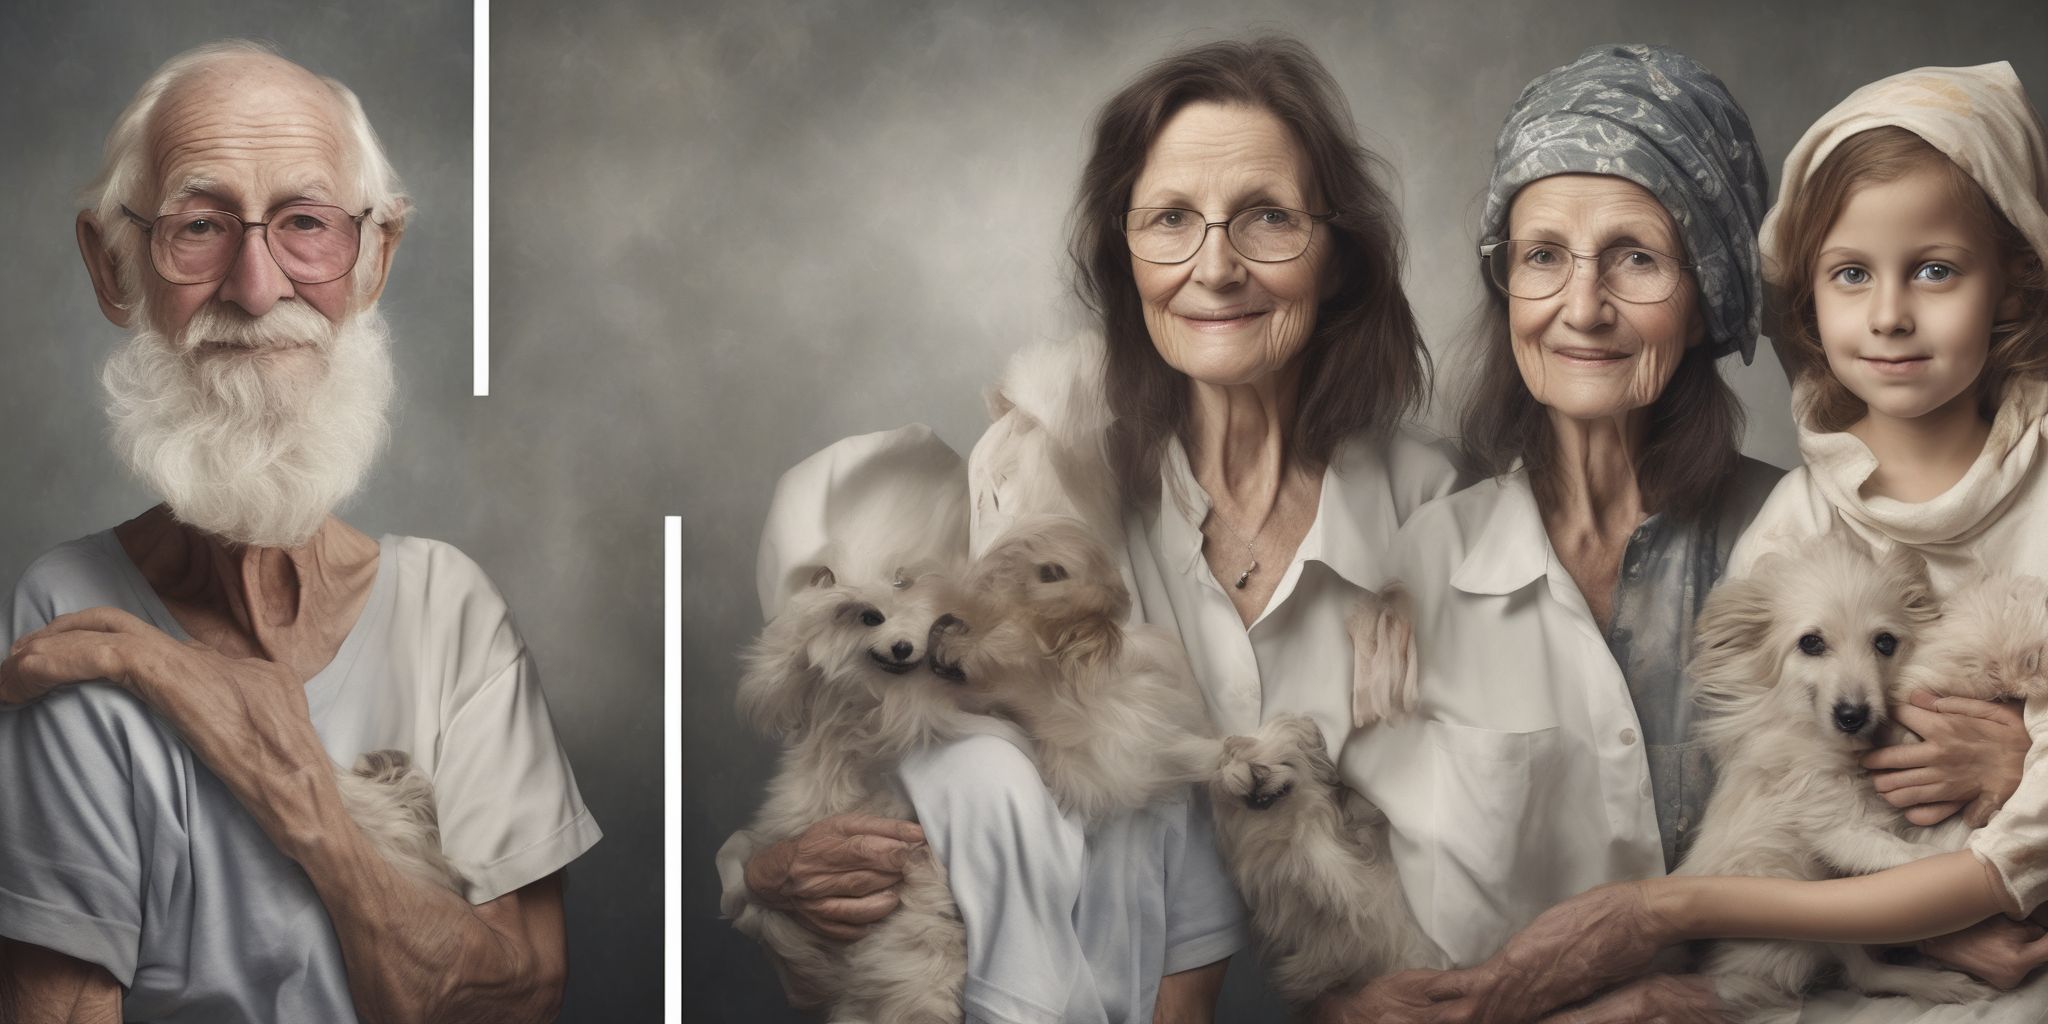 Charities  in realistic, photographic style